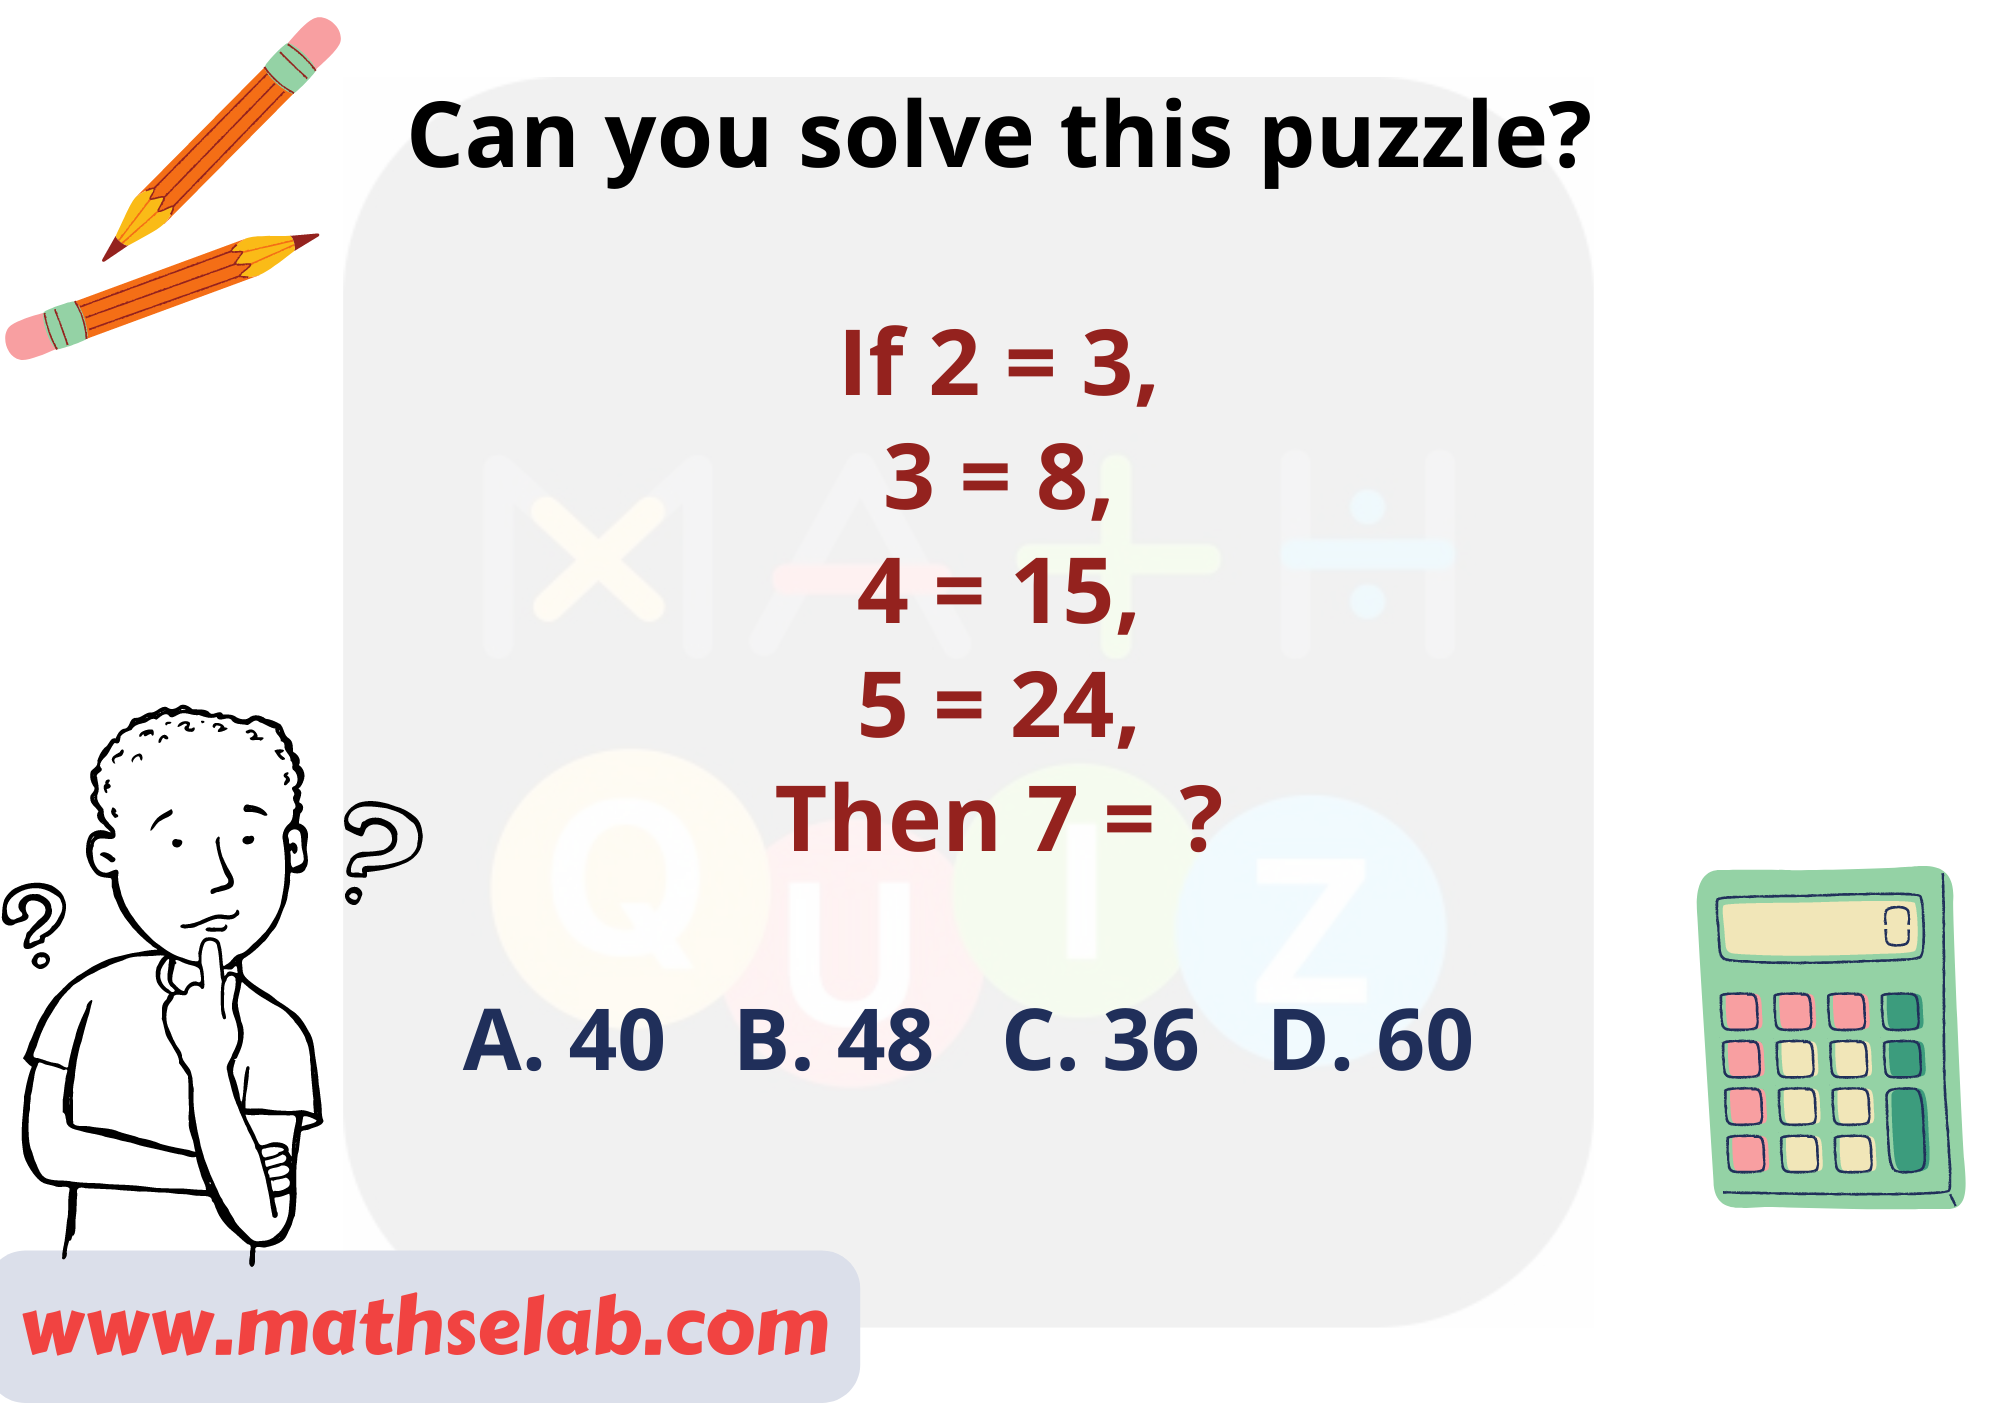 Can you solve this puzzle? If 2 = 3, 3 = 8, 4 = 15, 5 = 24, Then 7 = ?